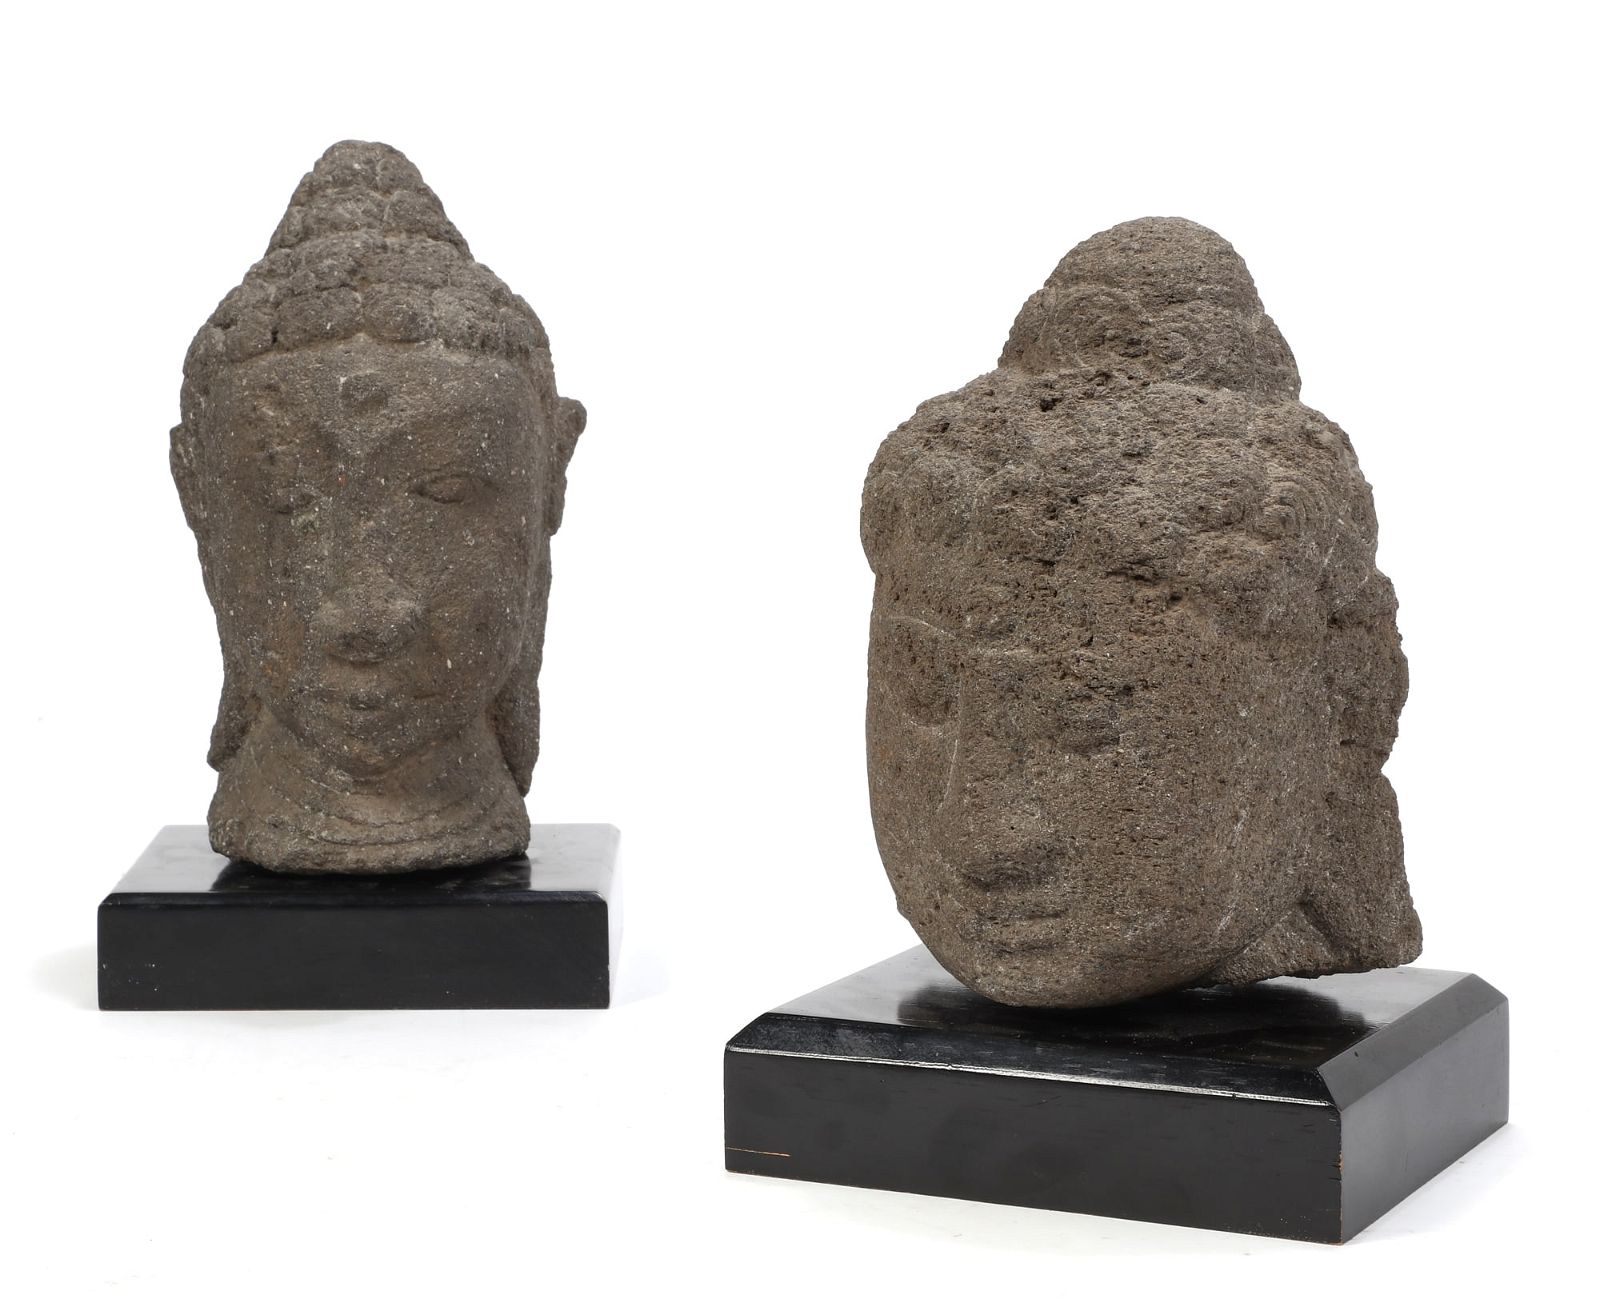 TWO CARVED STONE HEADS OF BUDDHATwo 2fb2f28